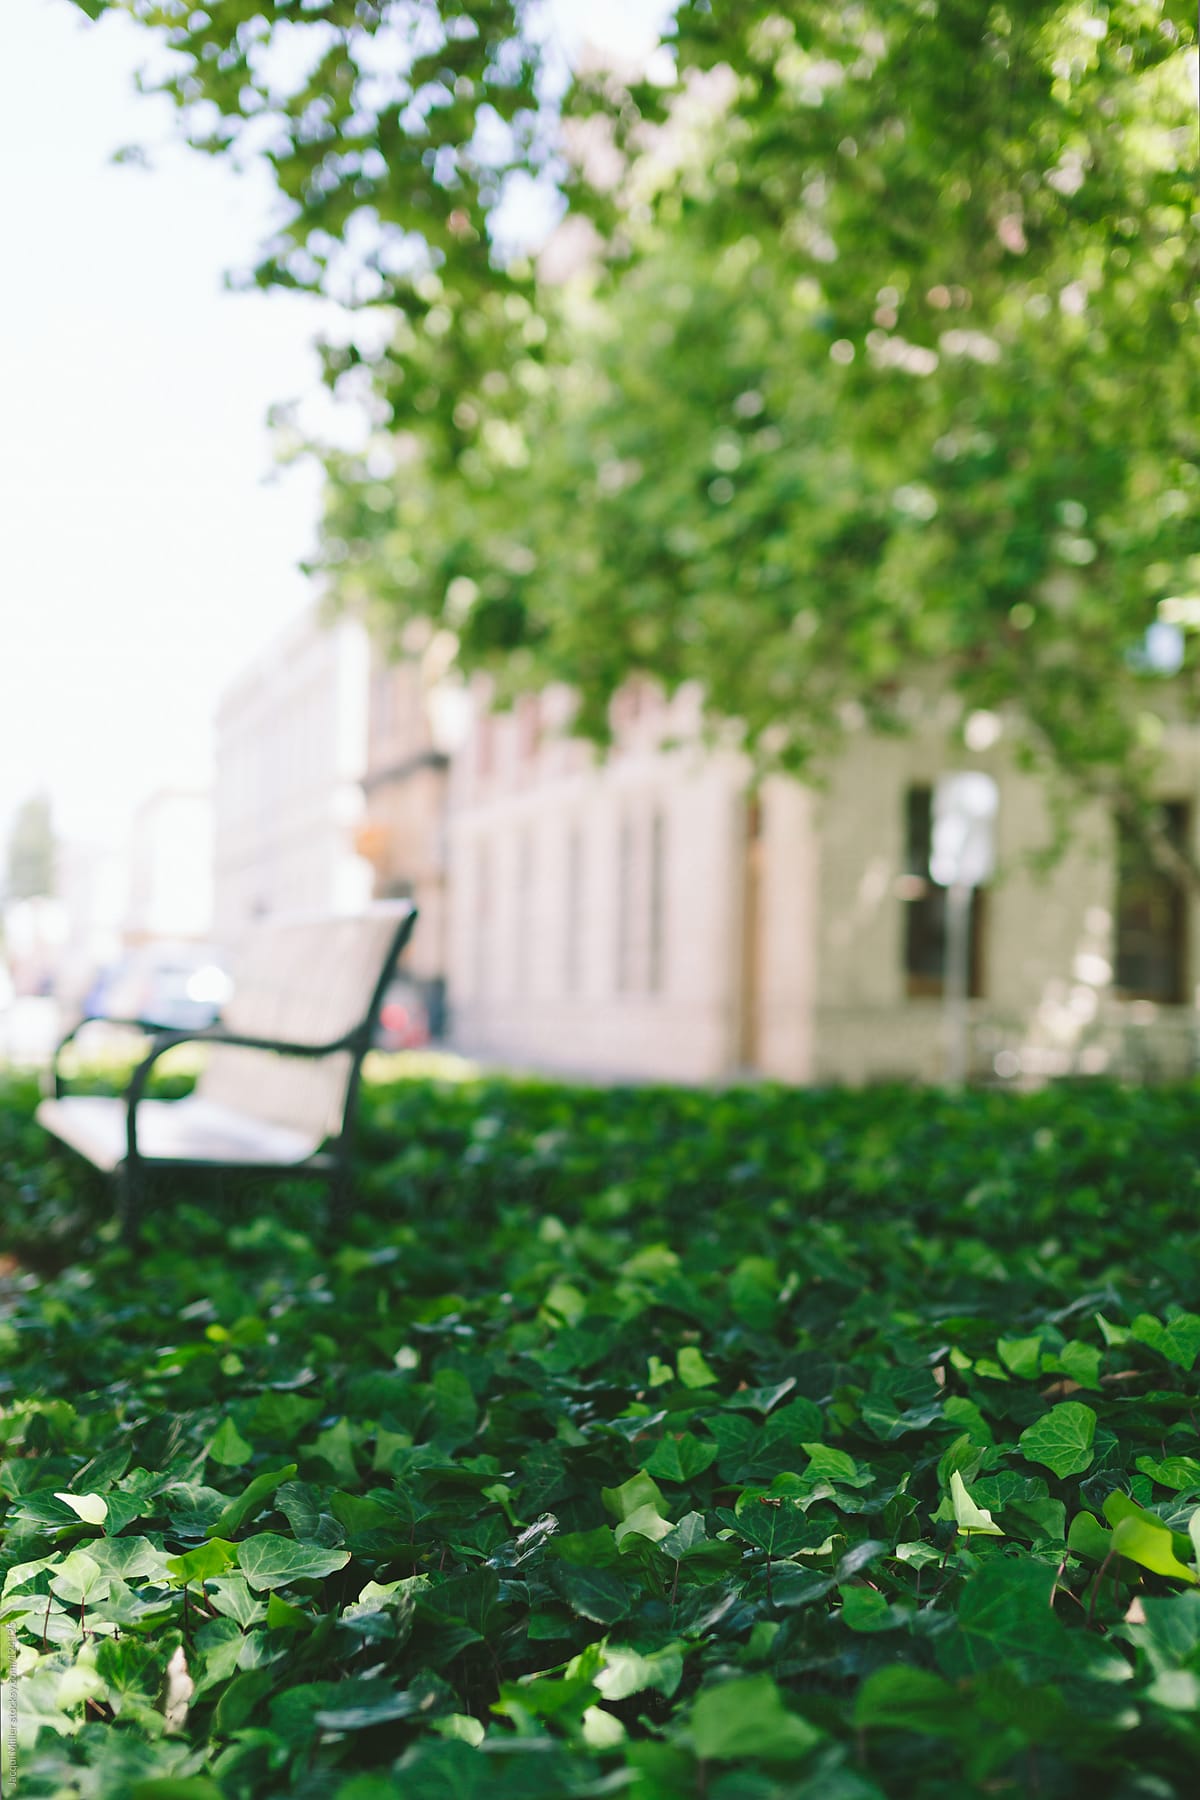 Park bench surrounded by a lush green ground cover